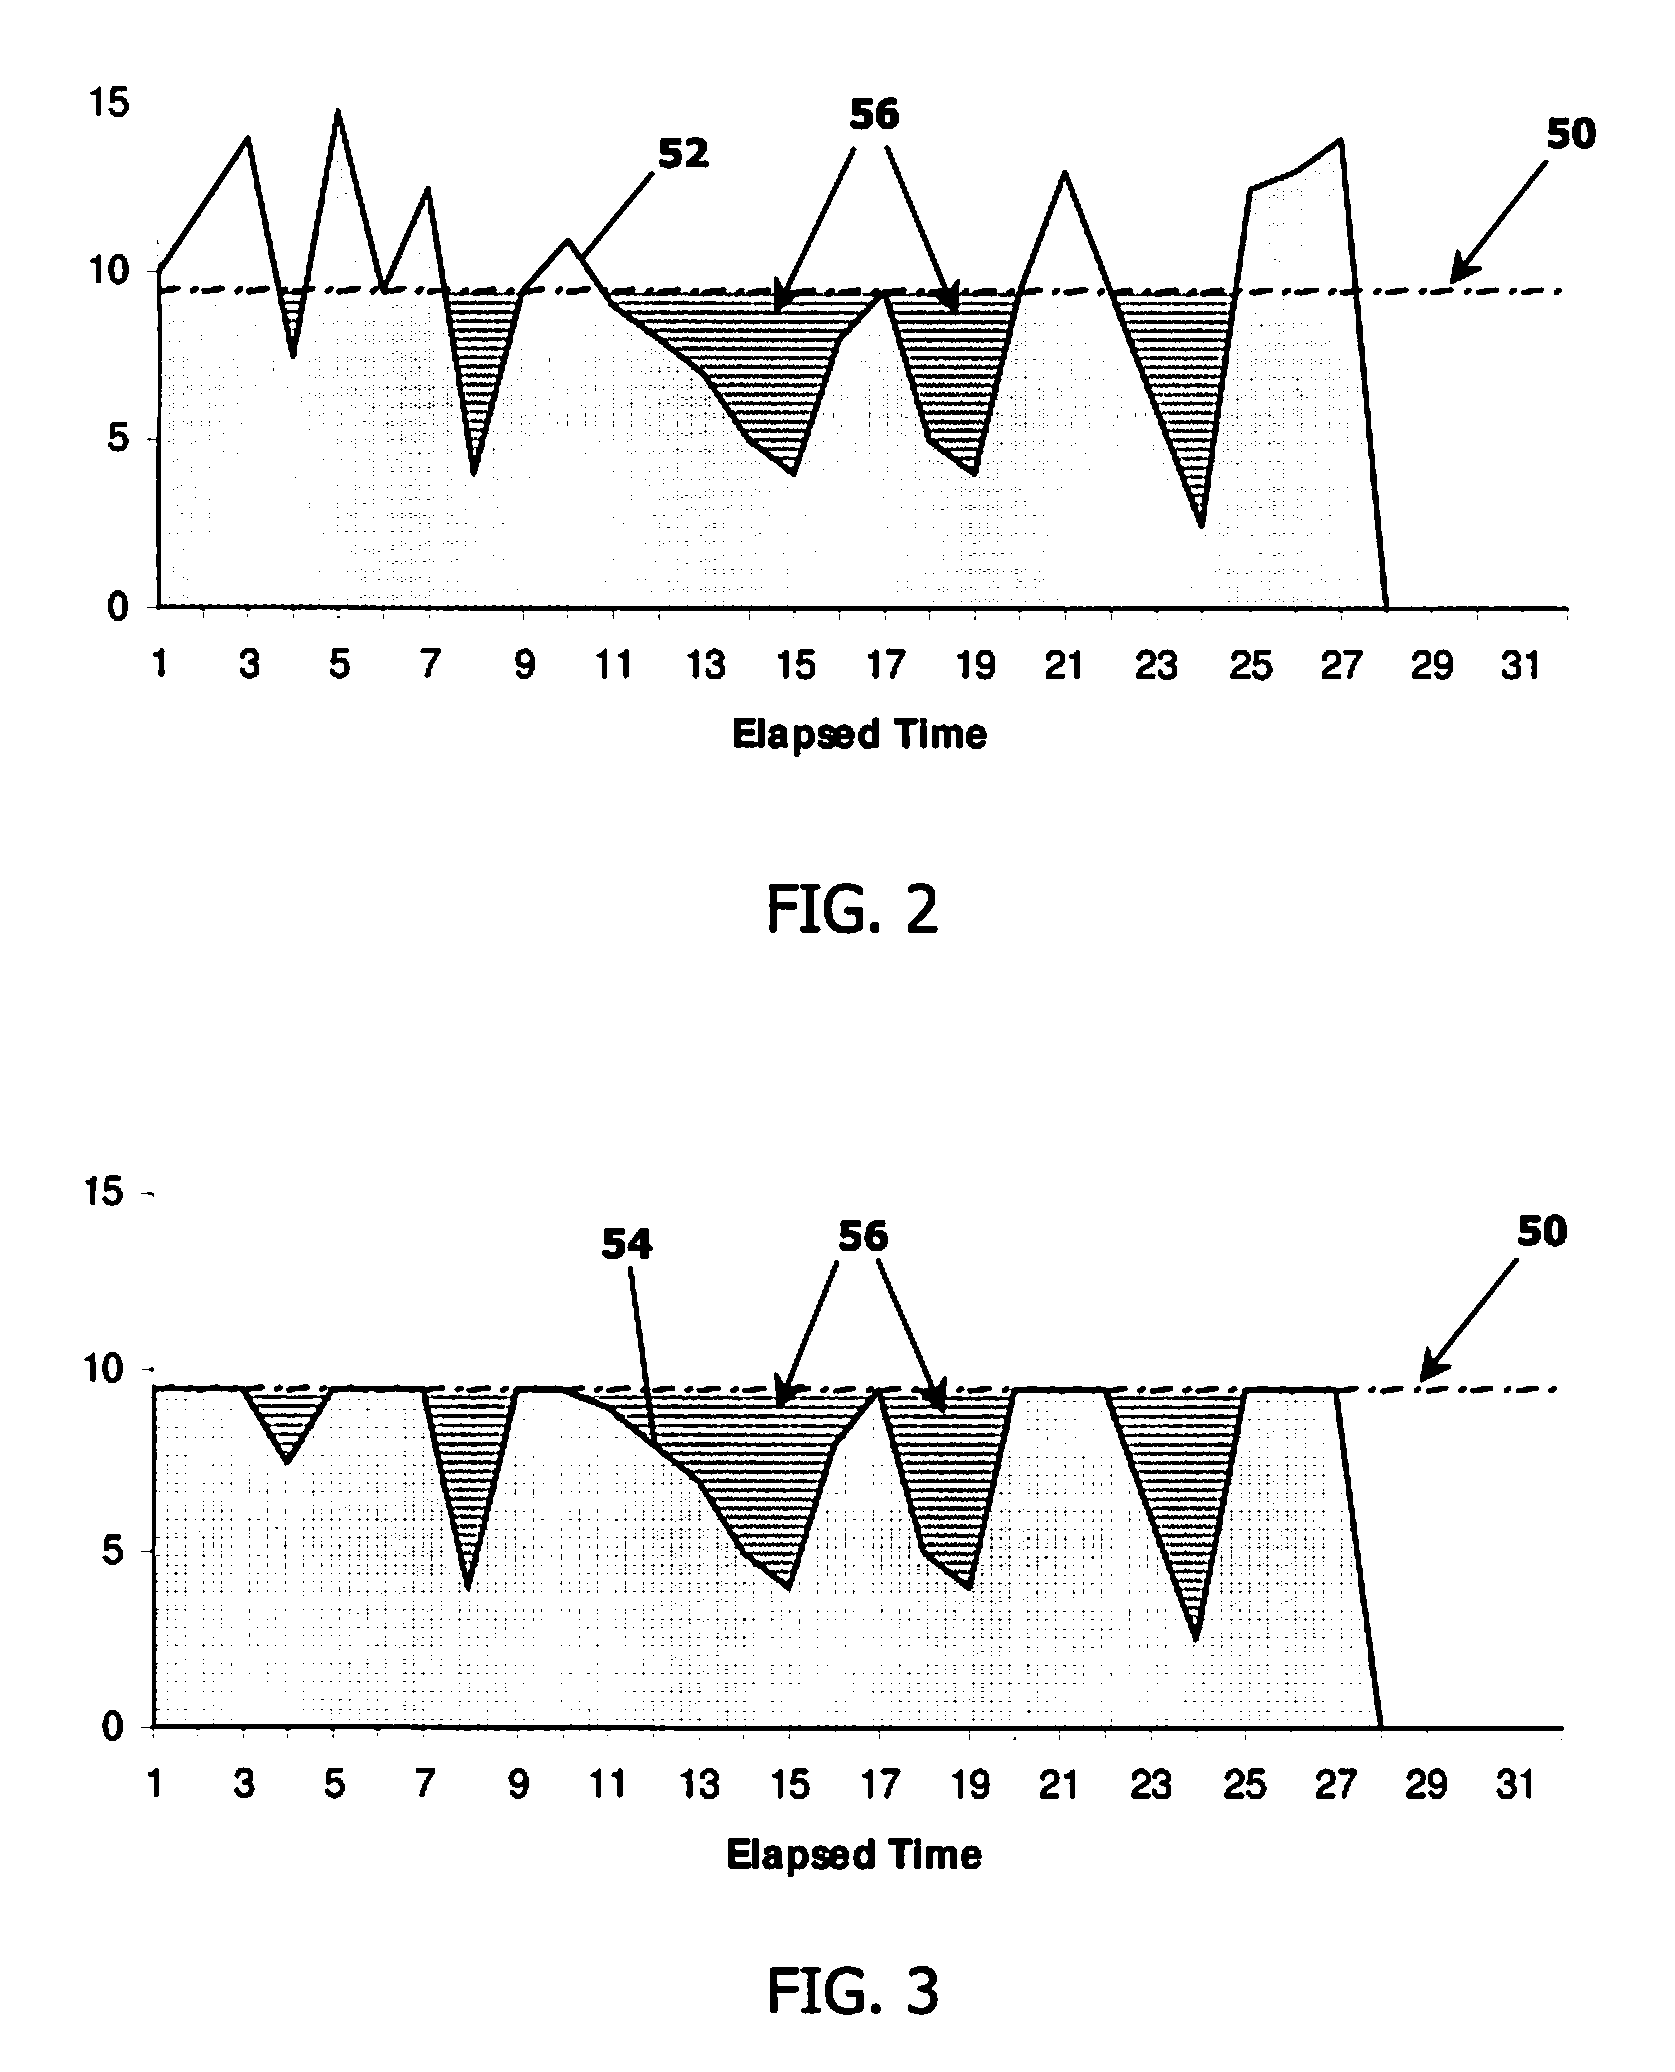 Resource Allocation Based on Anticipated Resource Underutilization in a Logically Partitioned Multi-Processor Environment